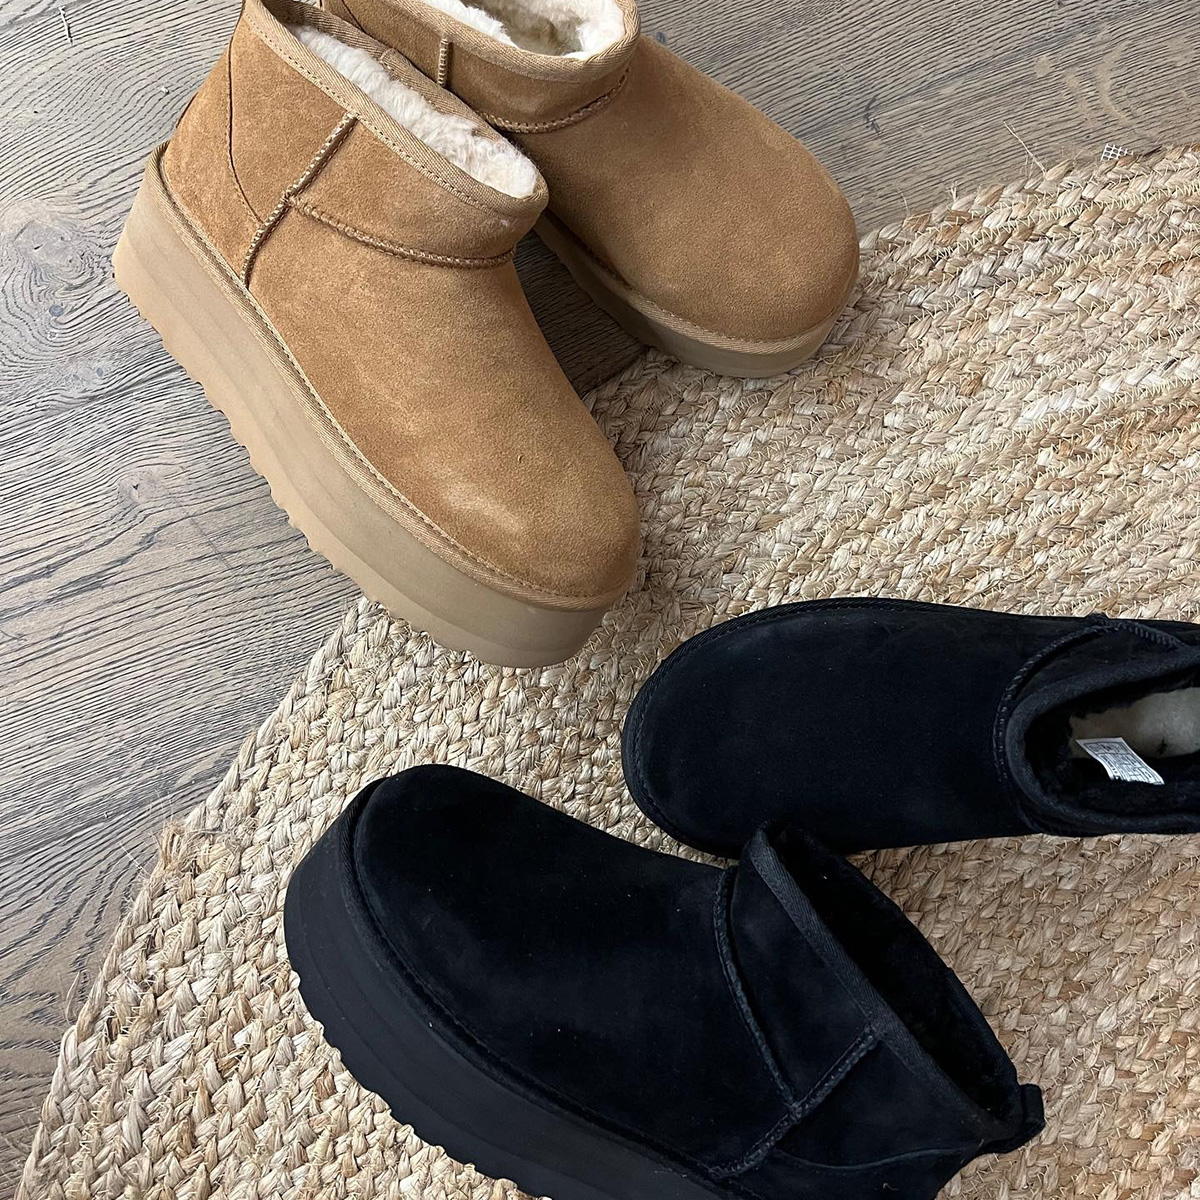 Ugg's Viral Platform Boots Are Back in Stock | Who What Wear